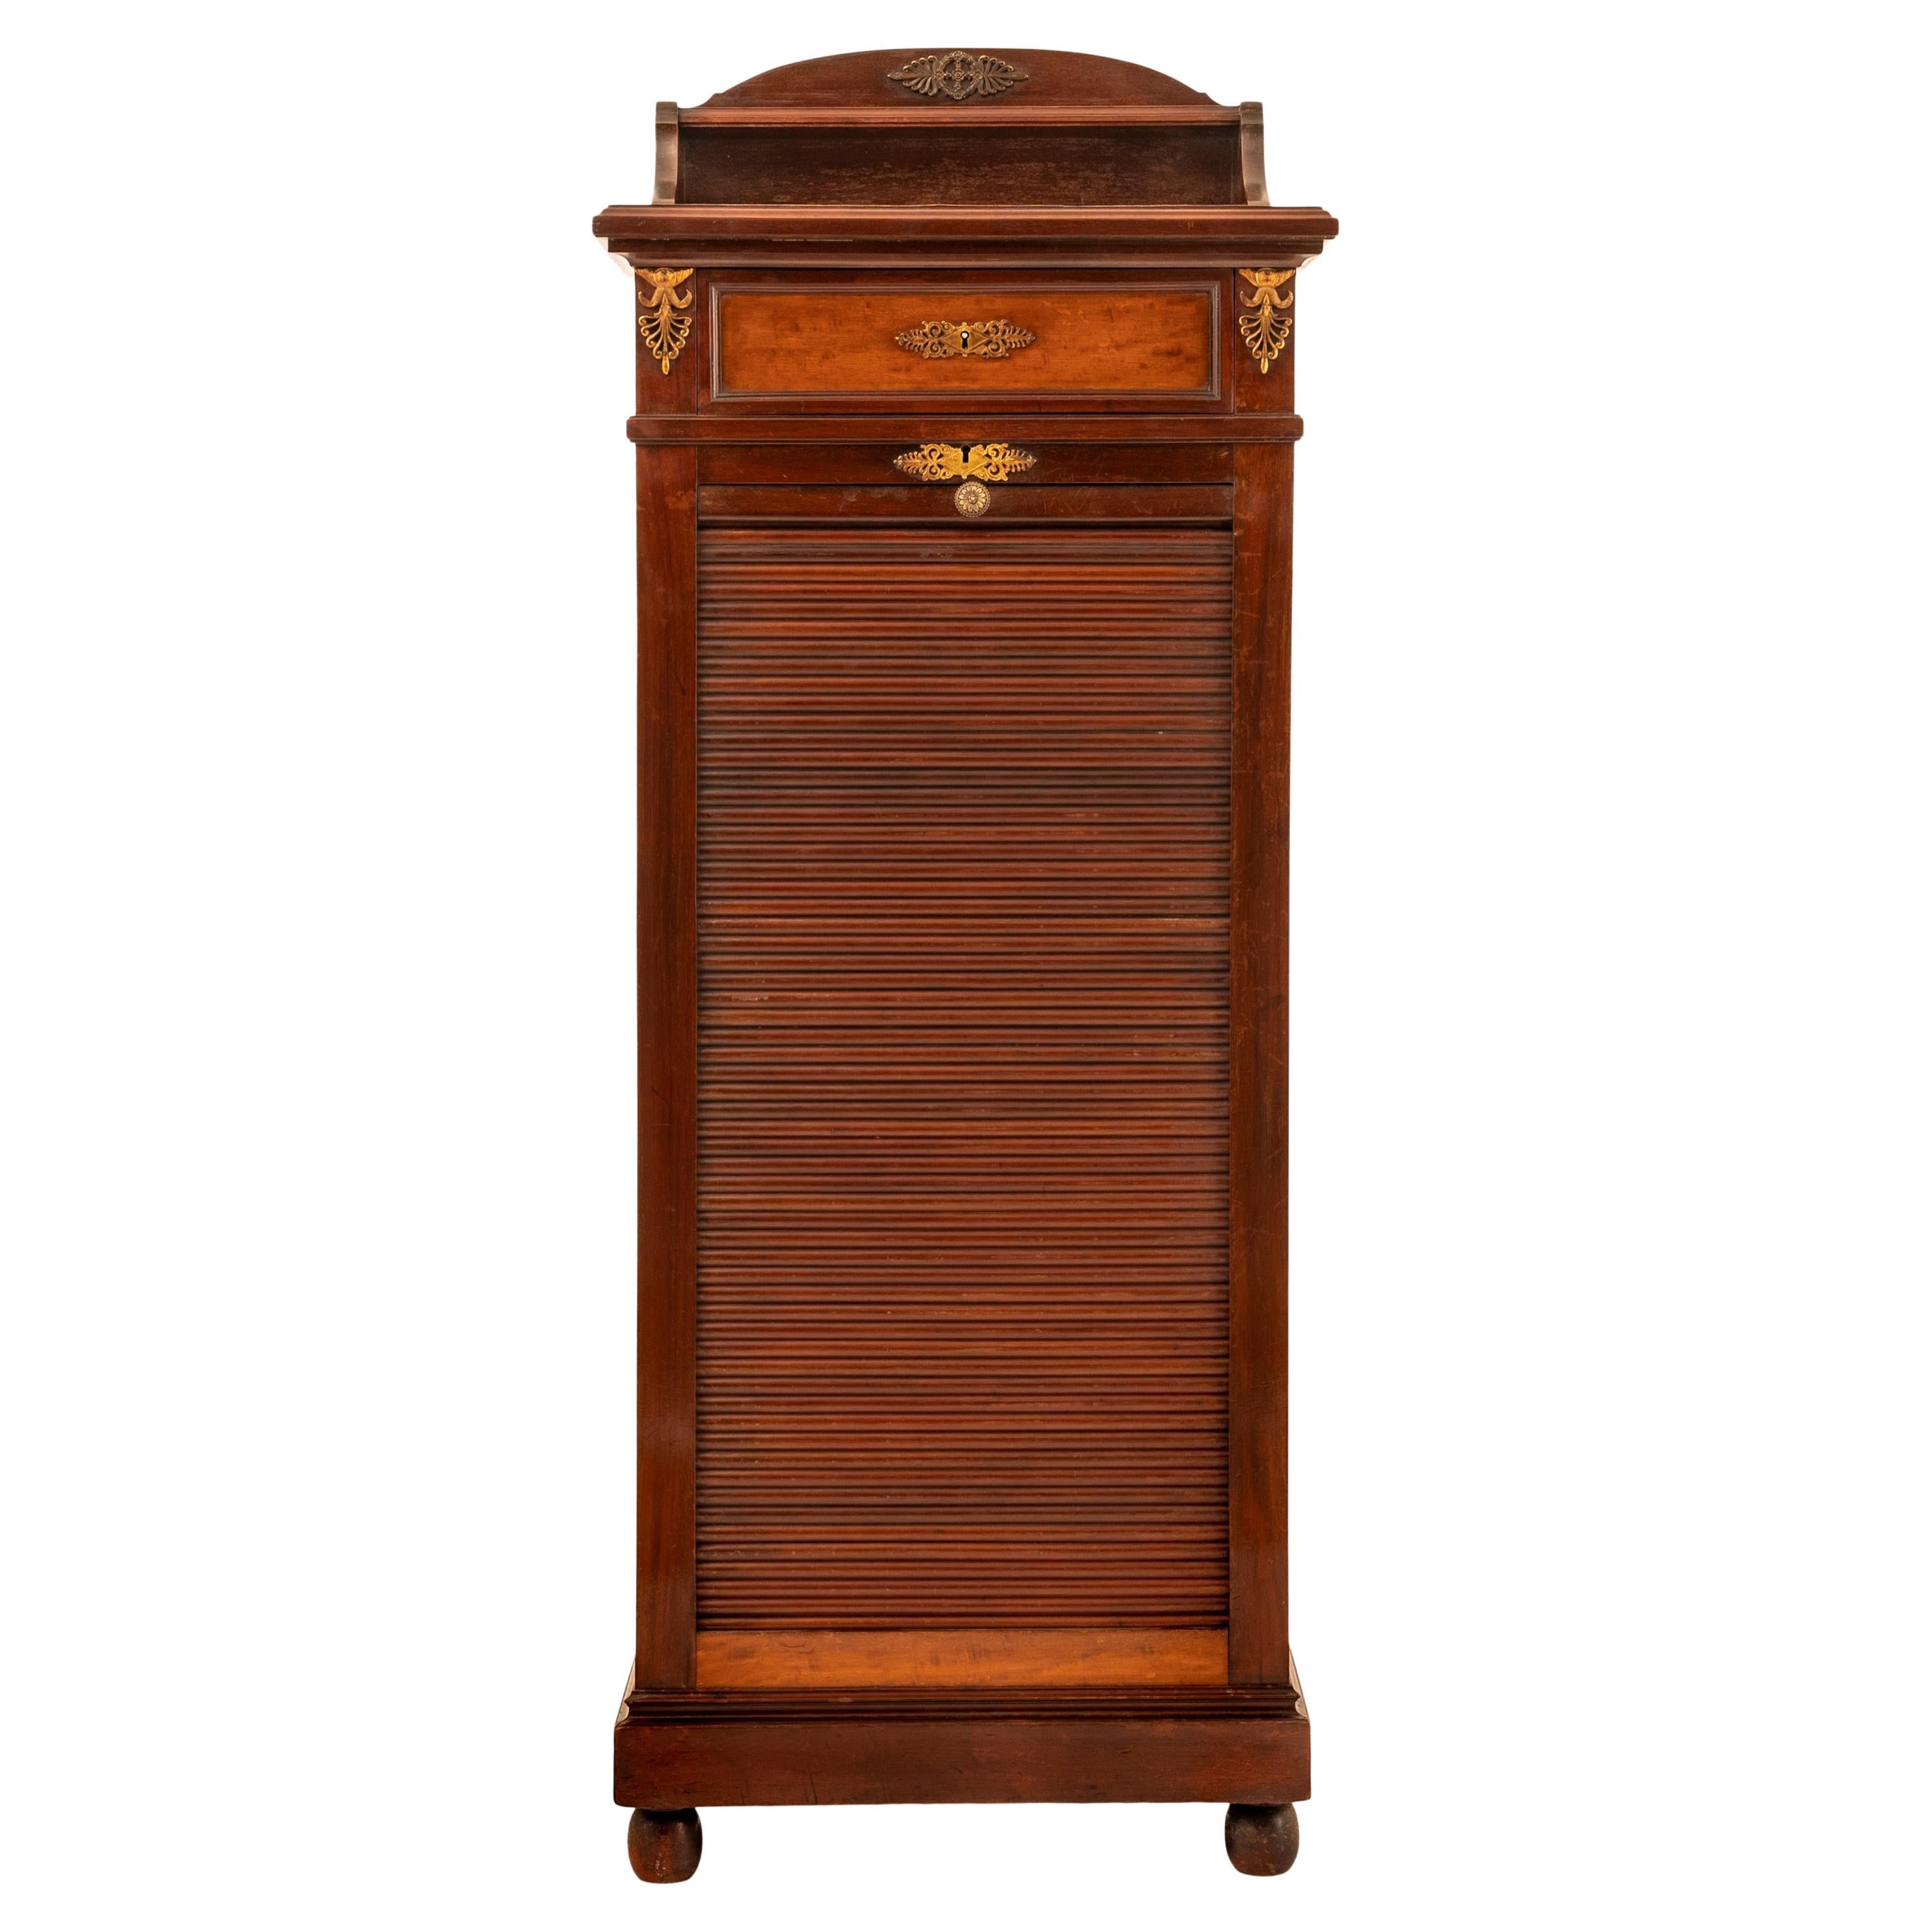 A very good quality antique French Louis XV walnut and ormolu tambour fronted/roll top file cabinet, Paris circa 1900.
The cabinet having a gallery with a single shelf to the rear and an ormolu mount to the top, below is a single locking drawer